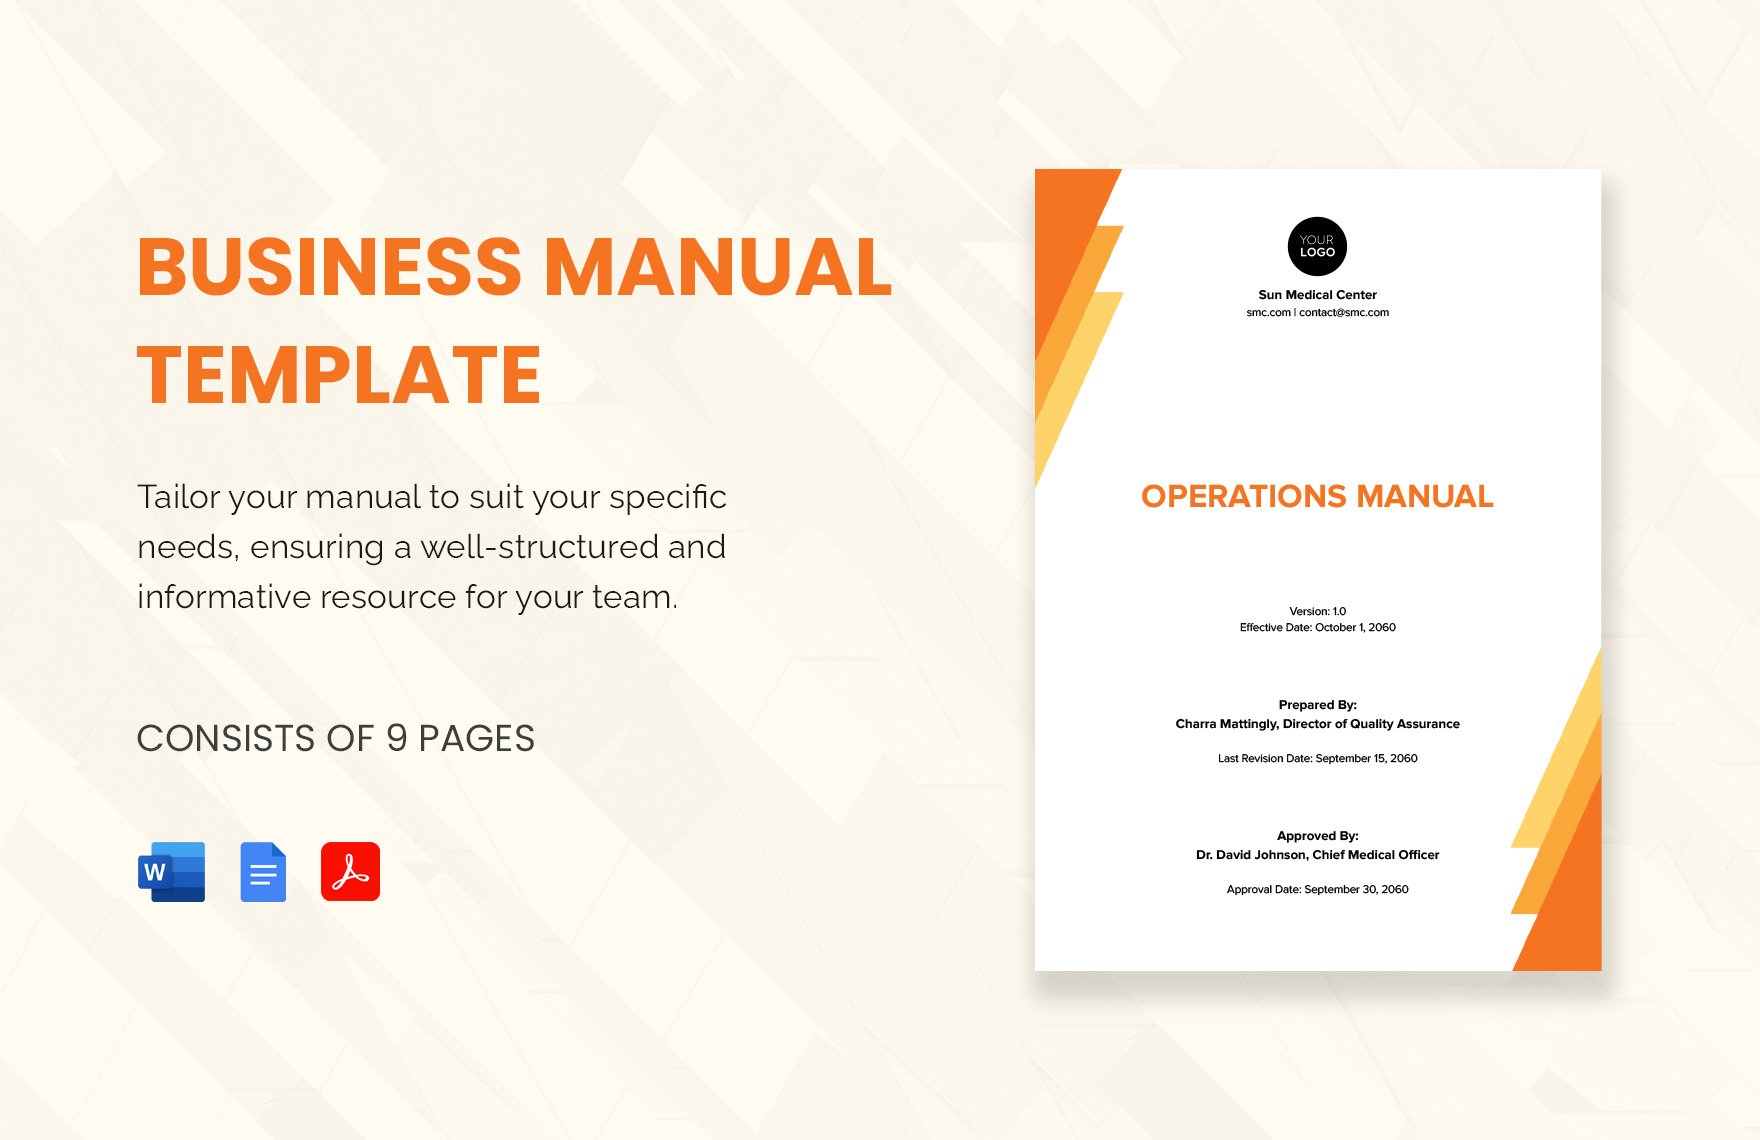 Business Manual Template in Word, Google Docs, PDF